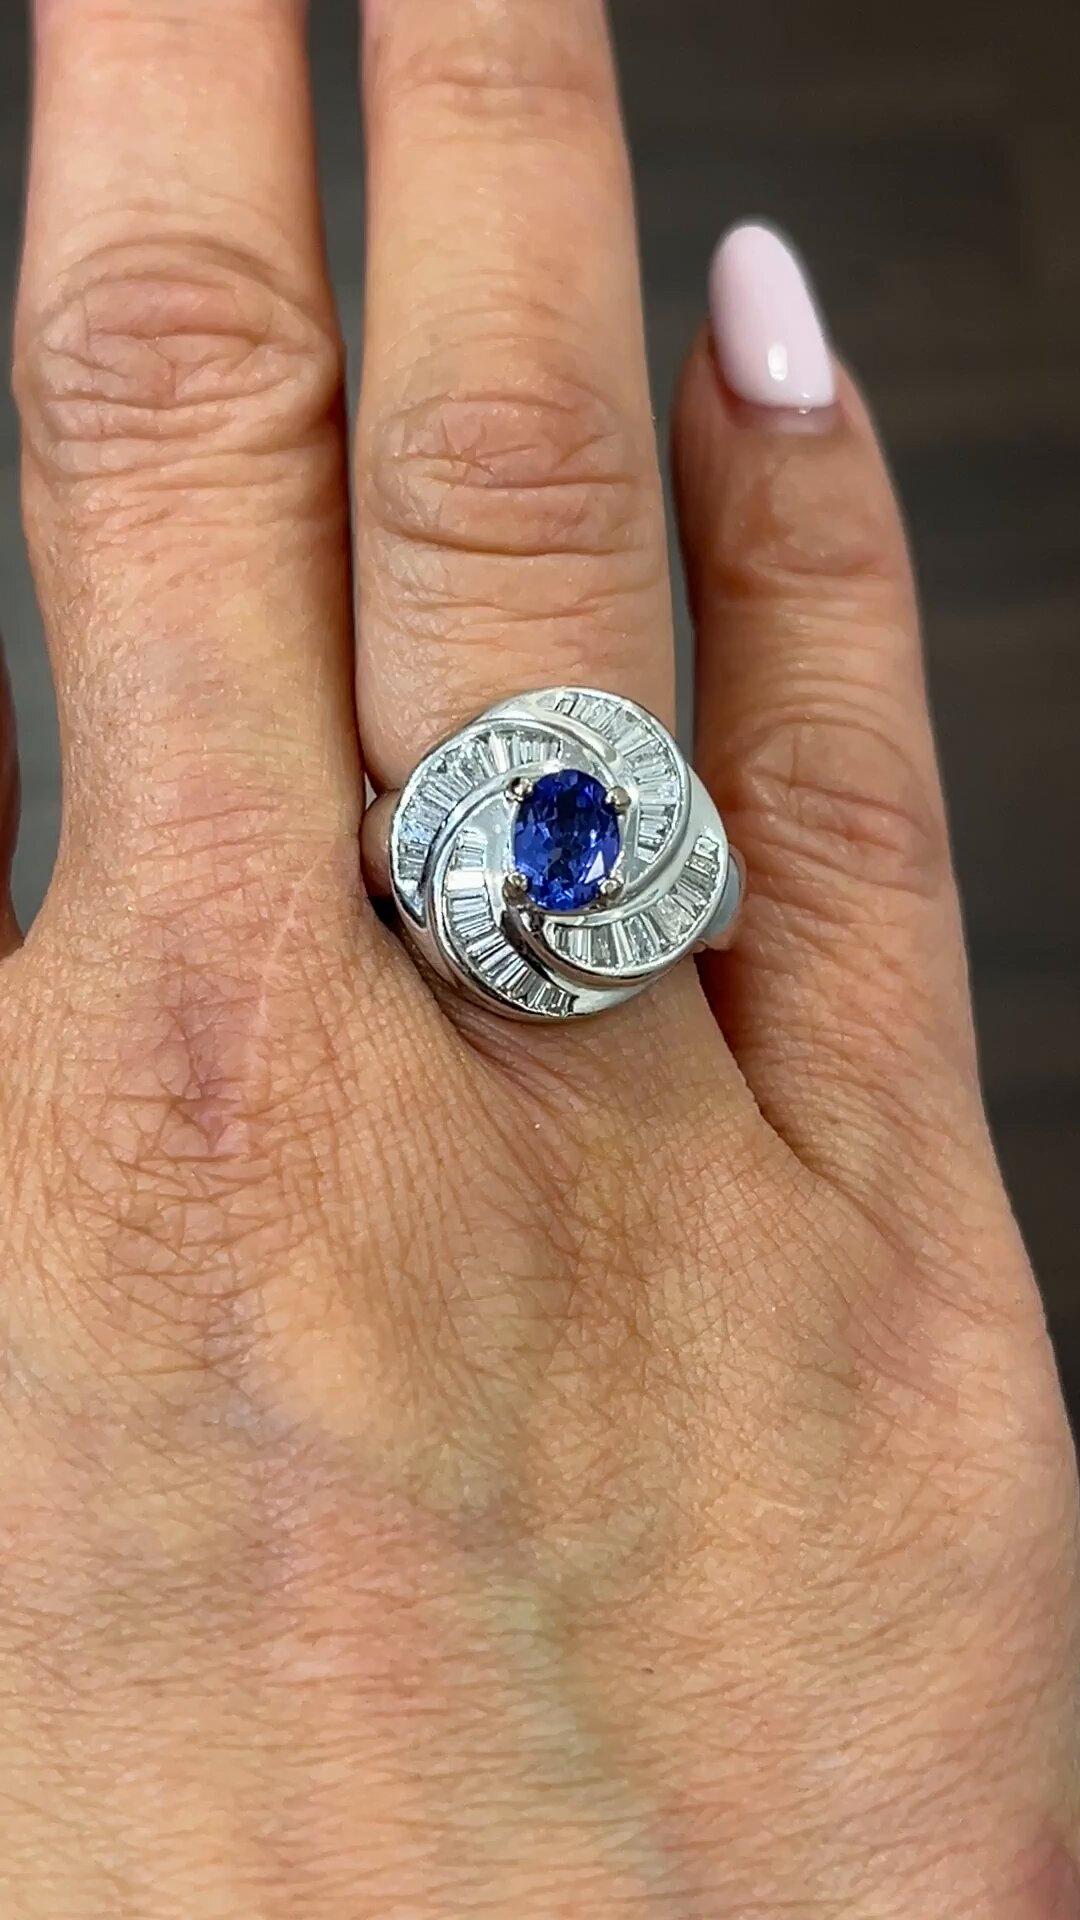 This stunning ring features a gorgeous oval-shaped tanzanite stone in a rich blue color, weighing 1.56 carats, accompanied by sparkling diamonds in a white gold setting. The ring is made of 18k gold, and has a vintage-inspired cocktail style.